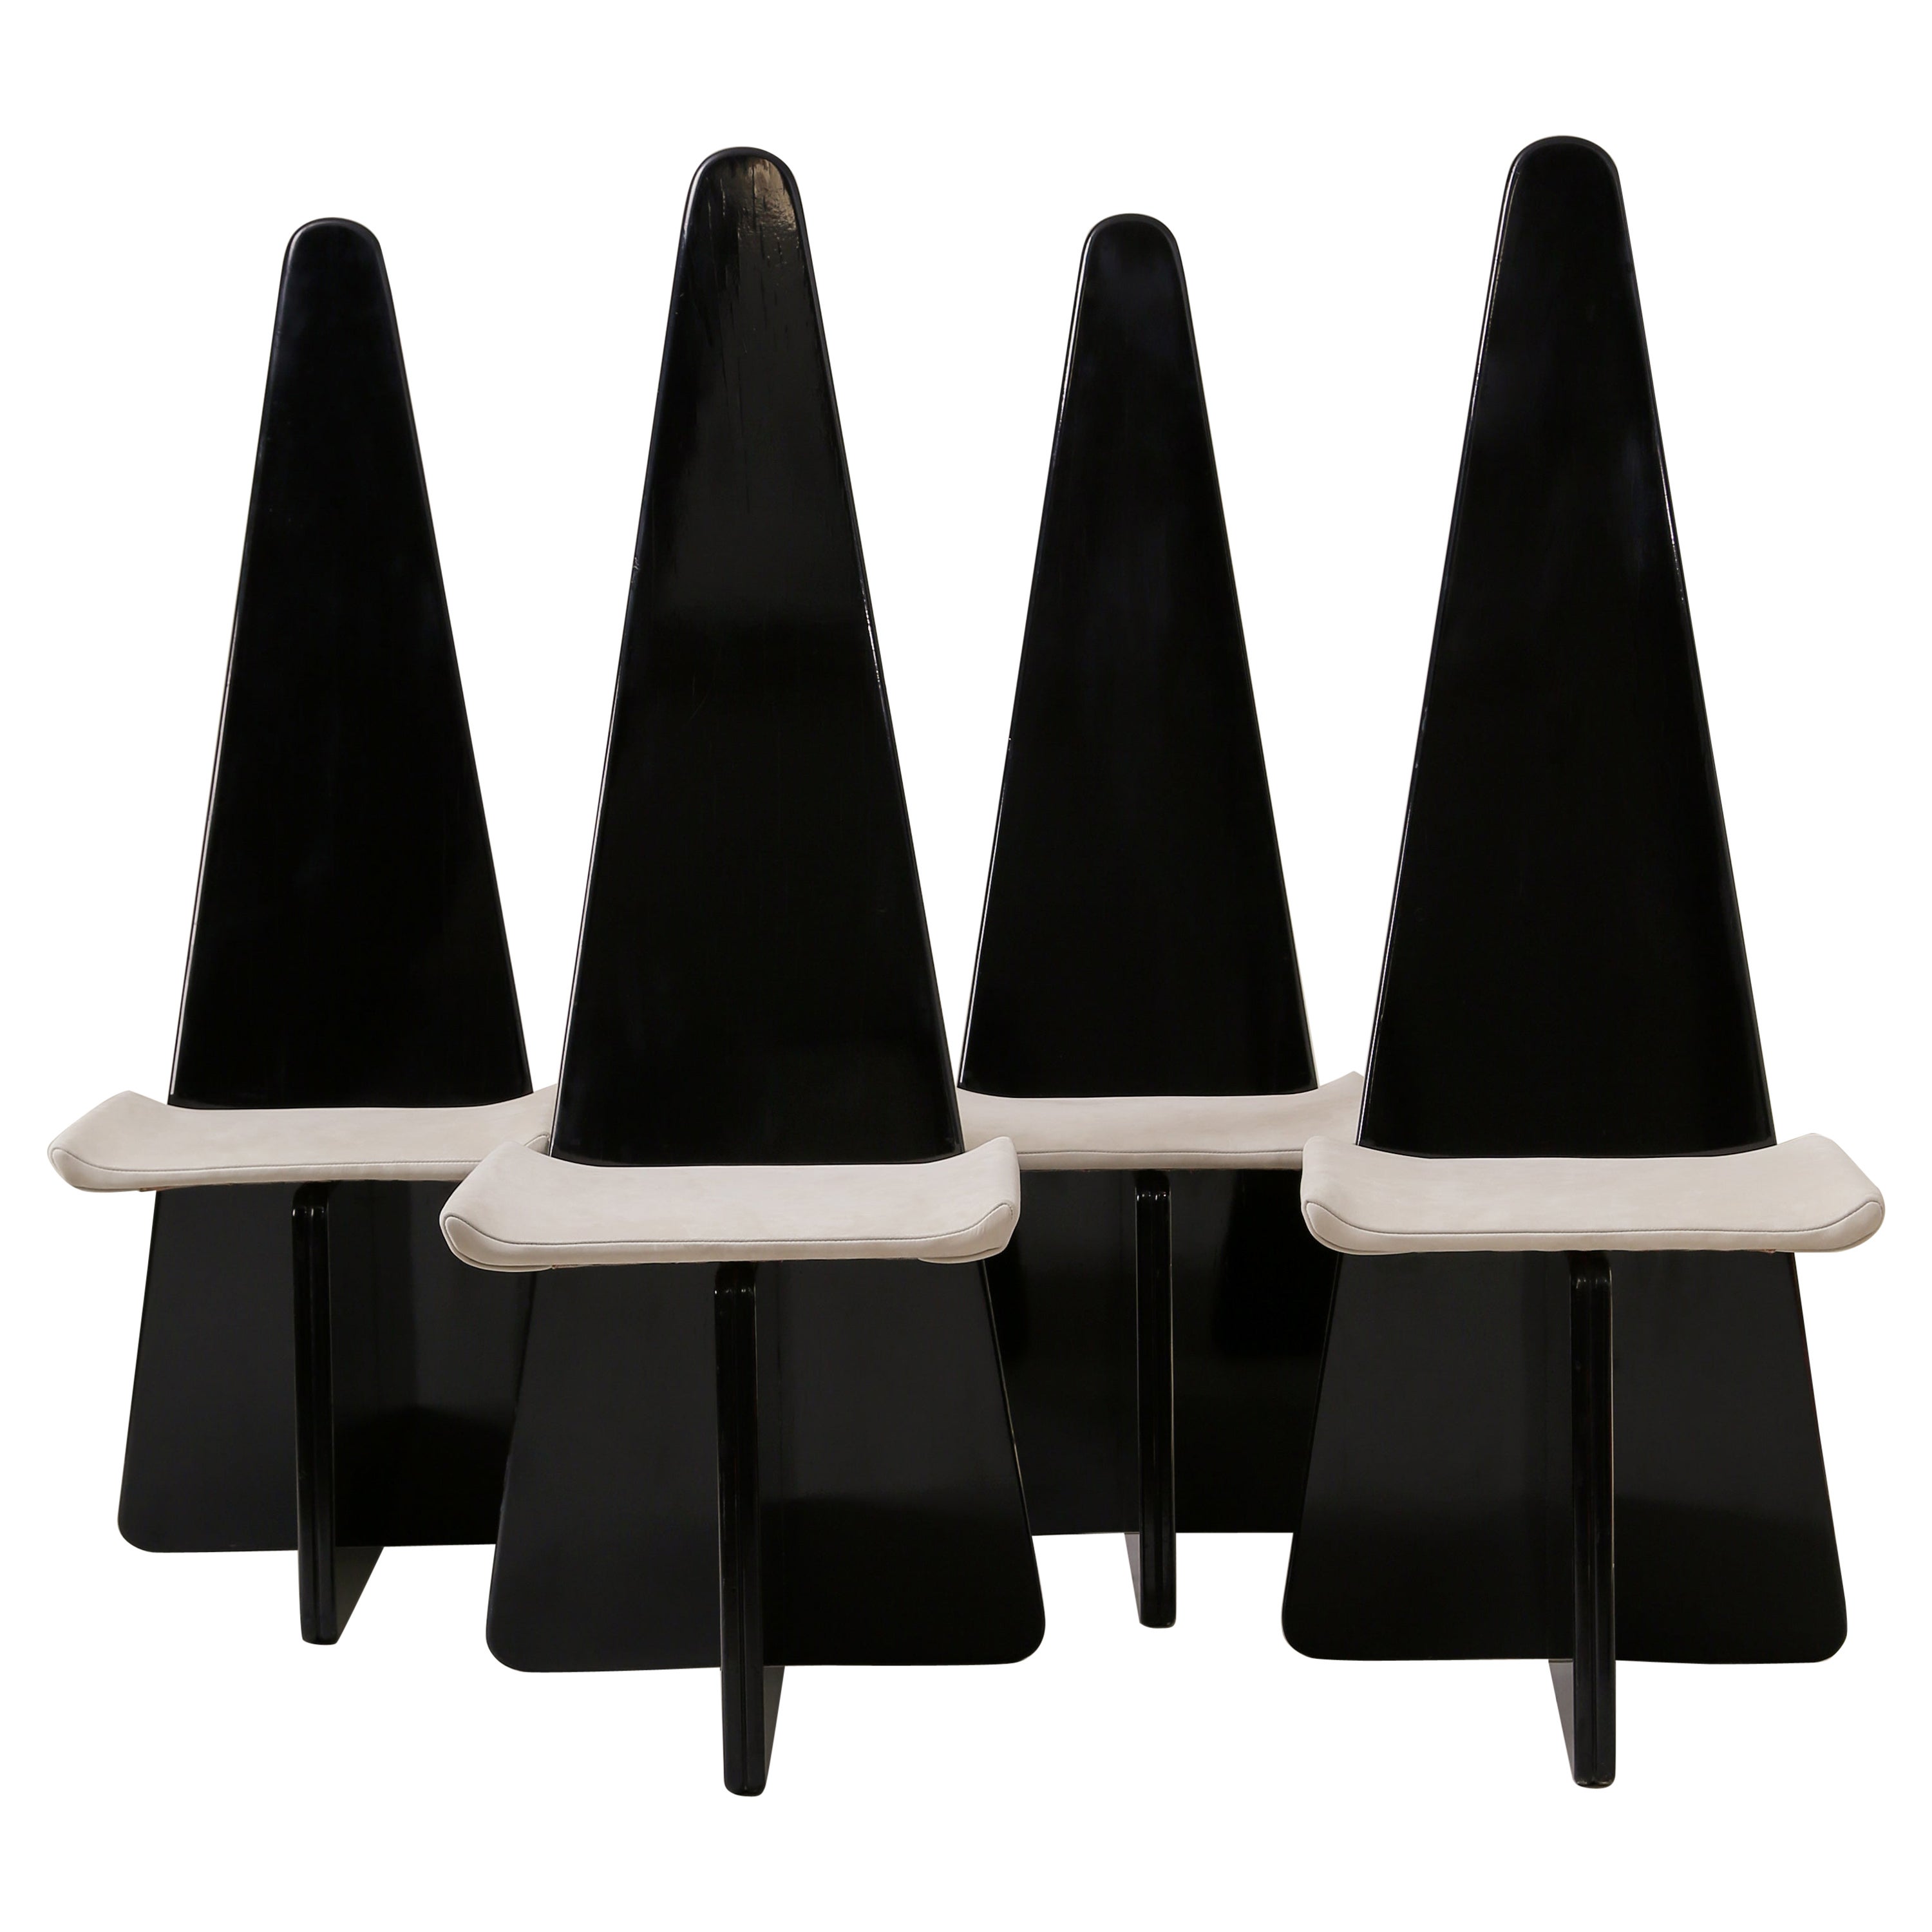 Modernist Triangular Dining Chair, Set of 4 For Sale